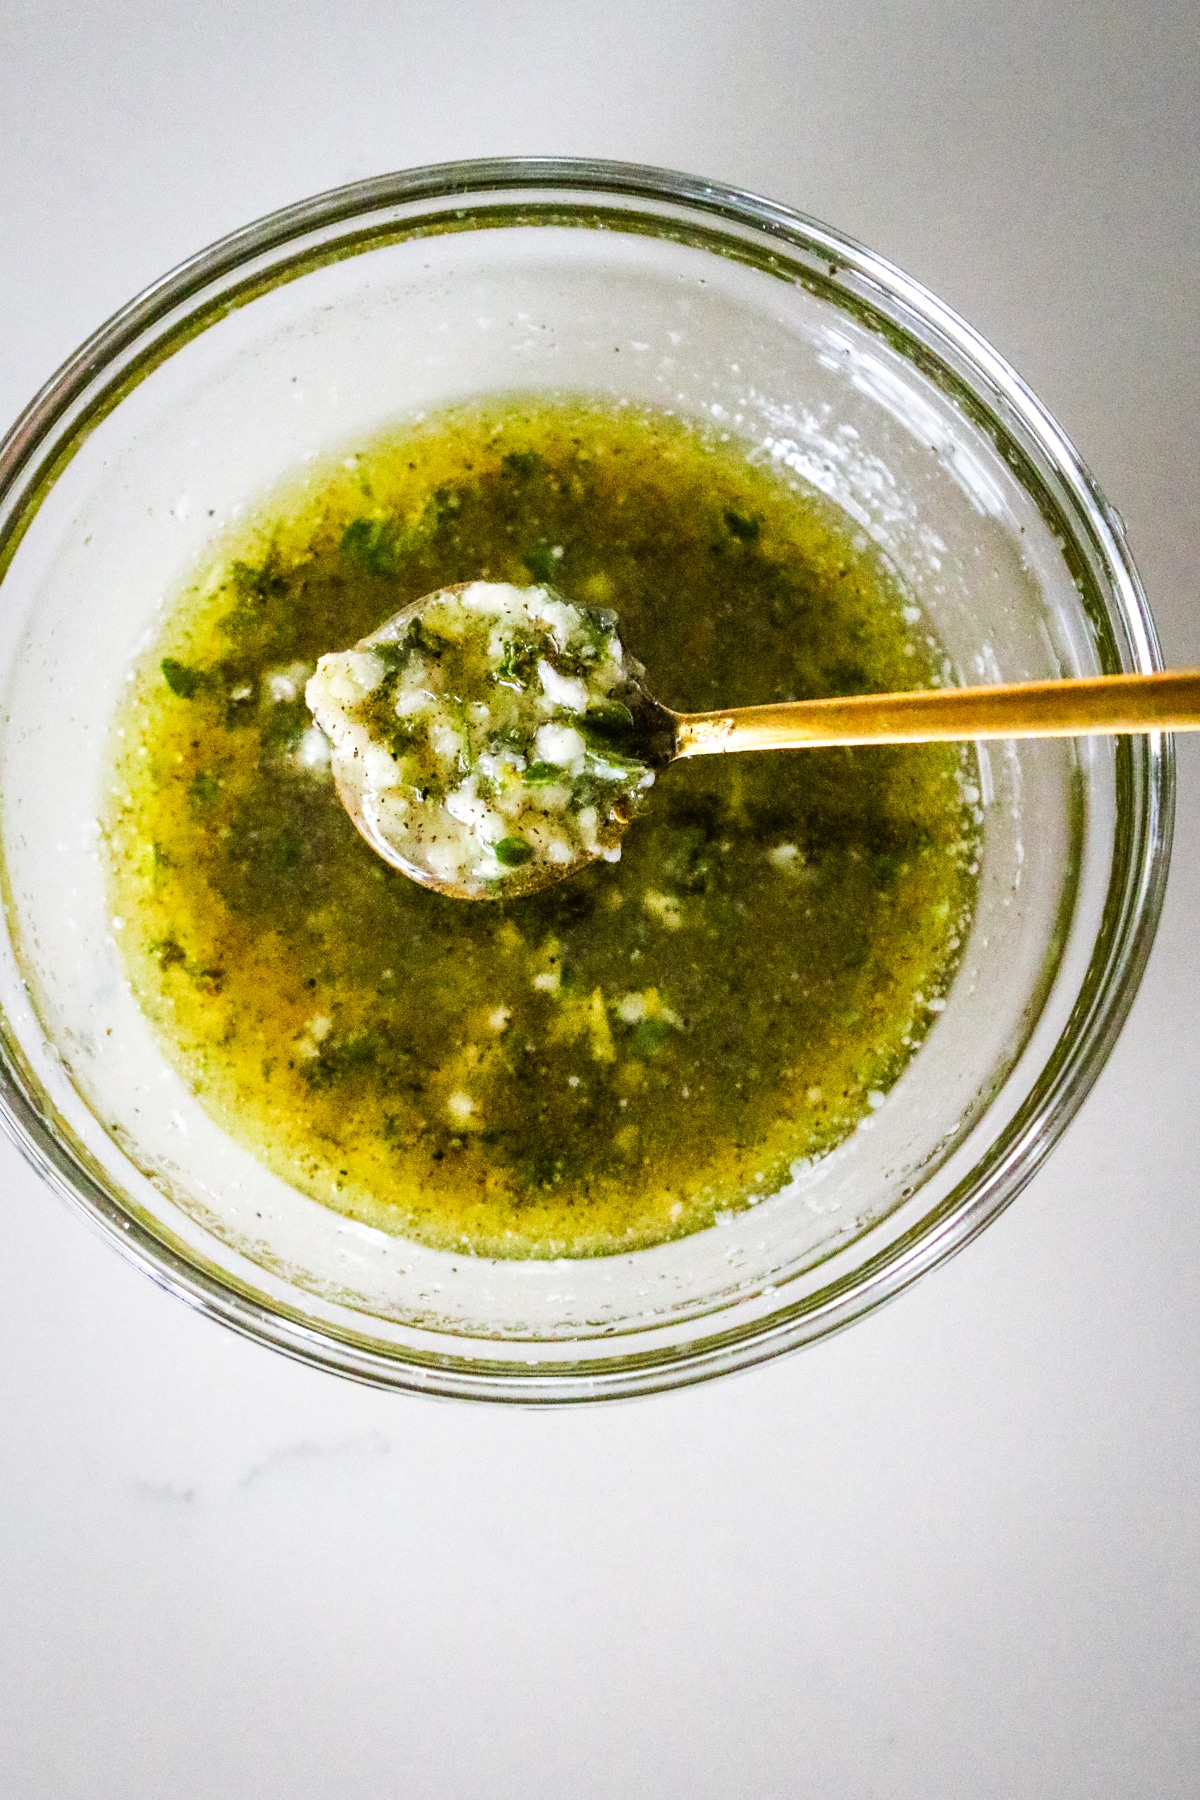 marinade with herbs, olive oil, and minced garlic.